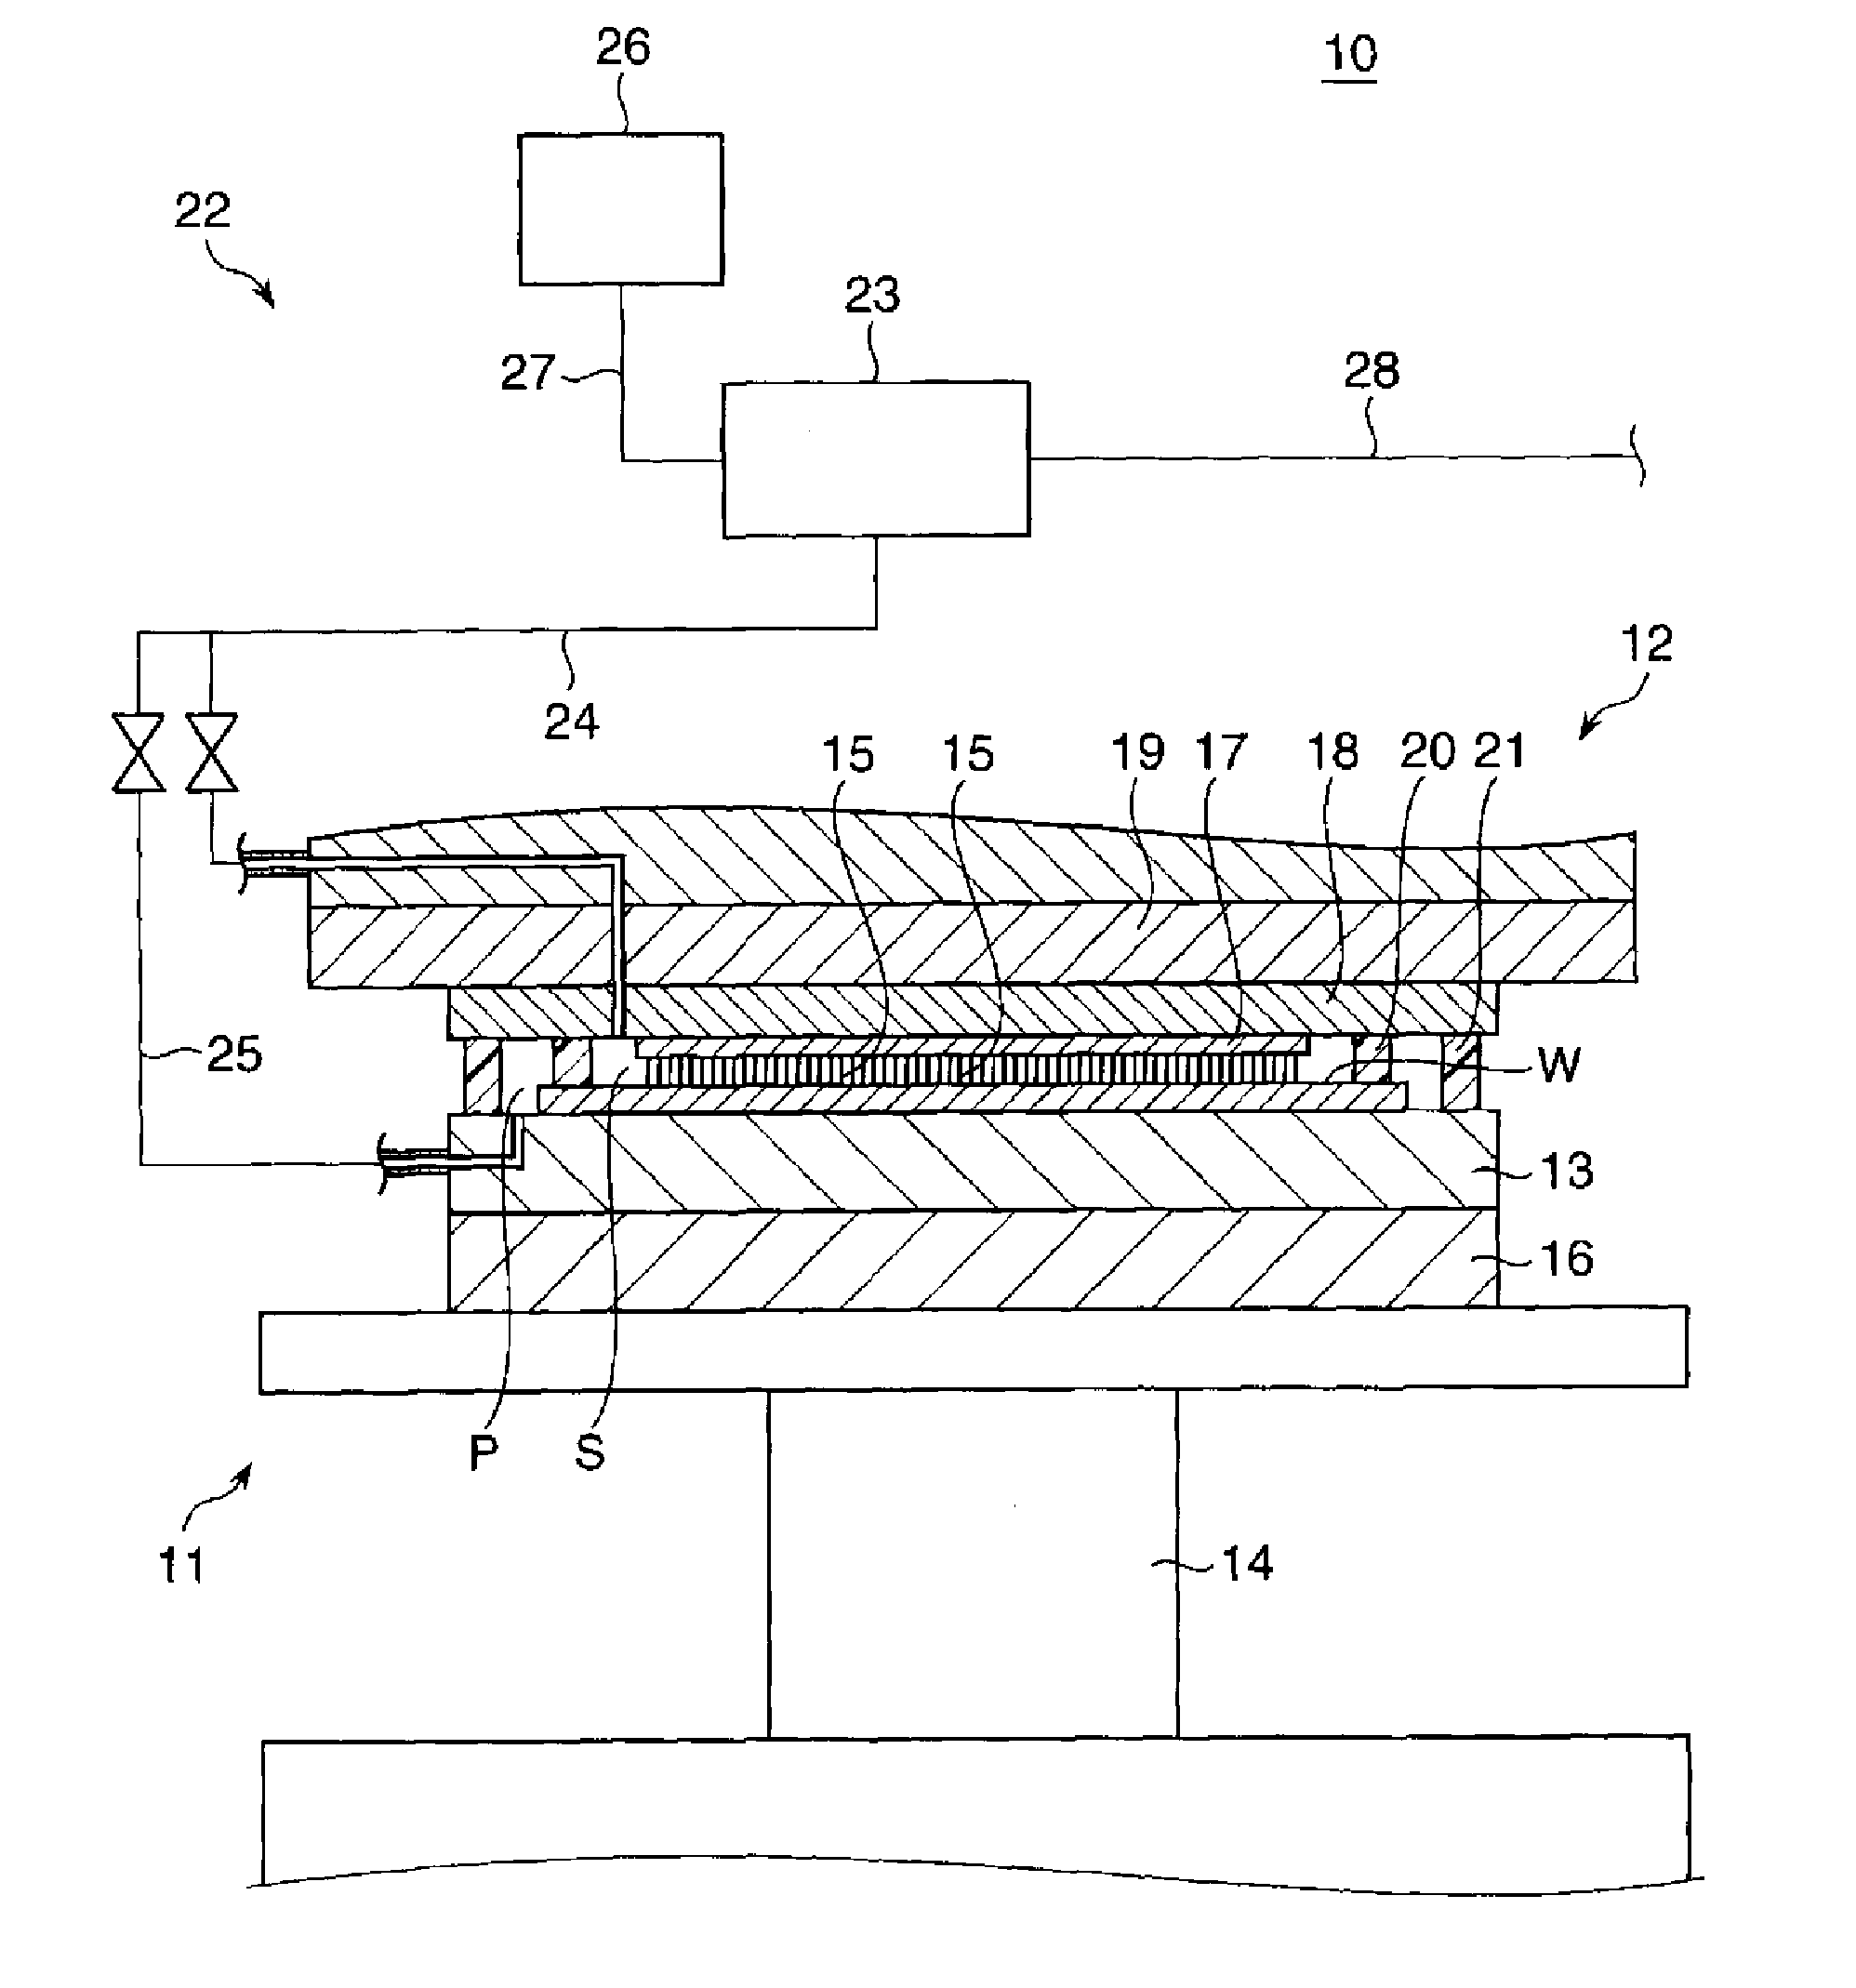 Substrate inspection apparatus